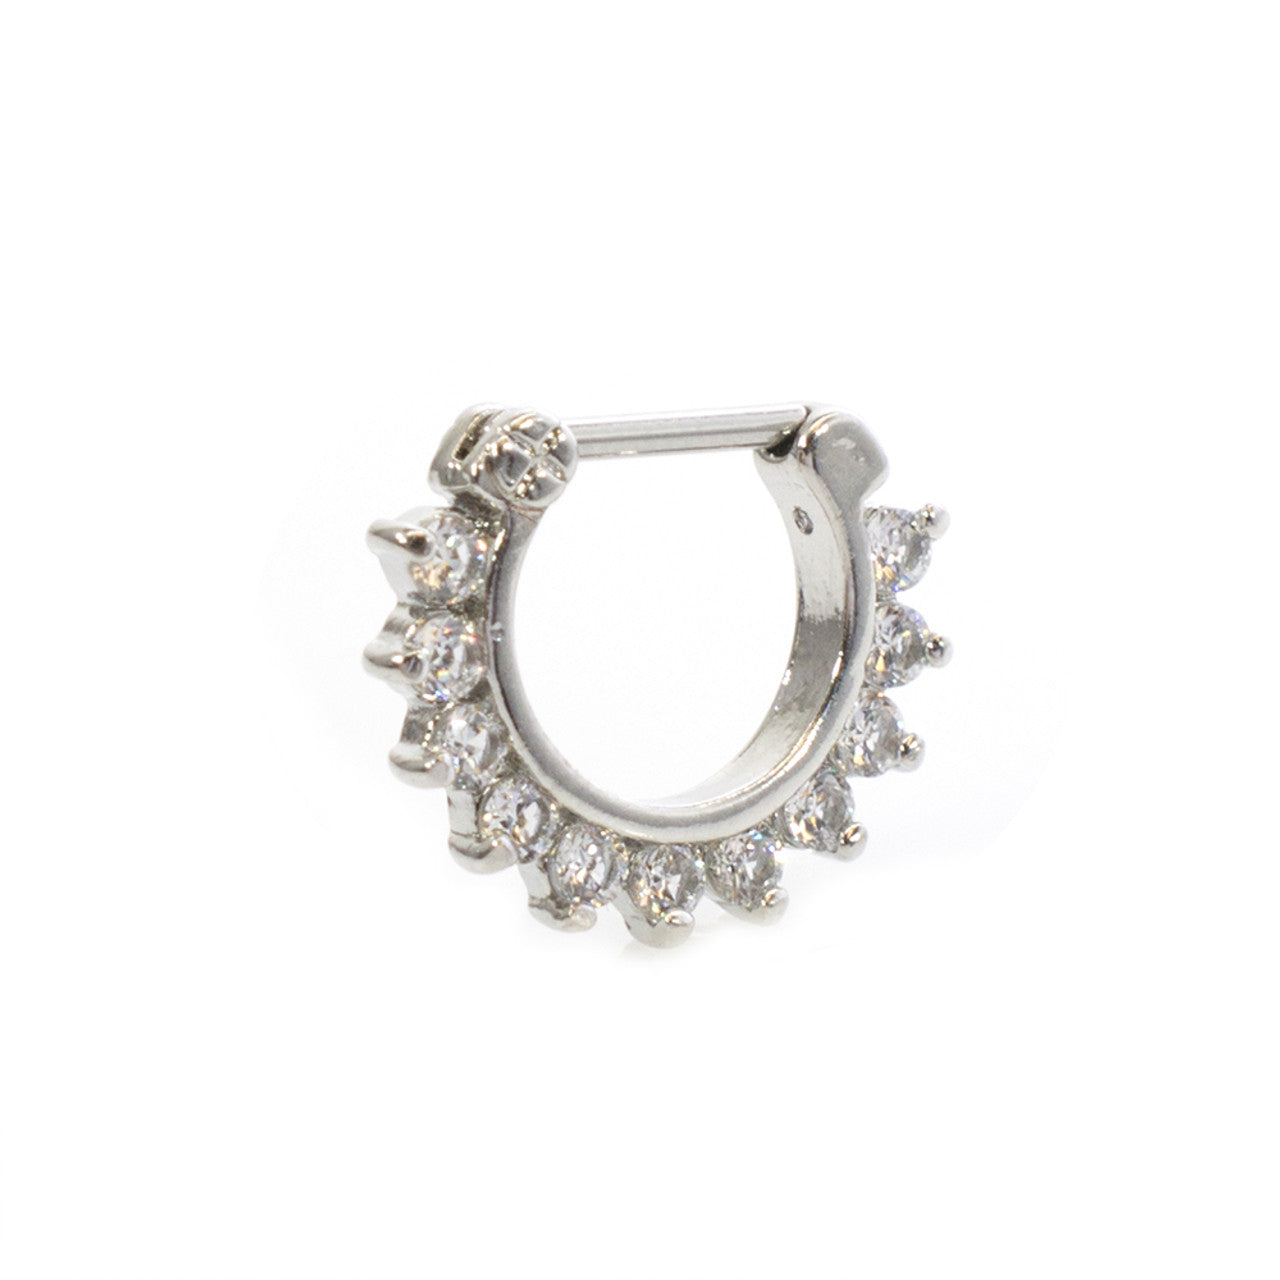 Surgical Steel Septum Clicker Ring 16 Gauge with 11 CZ Gems